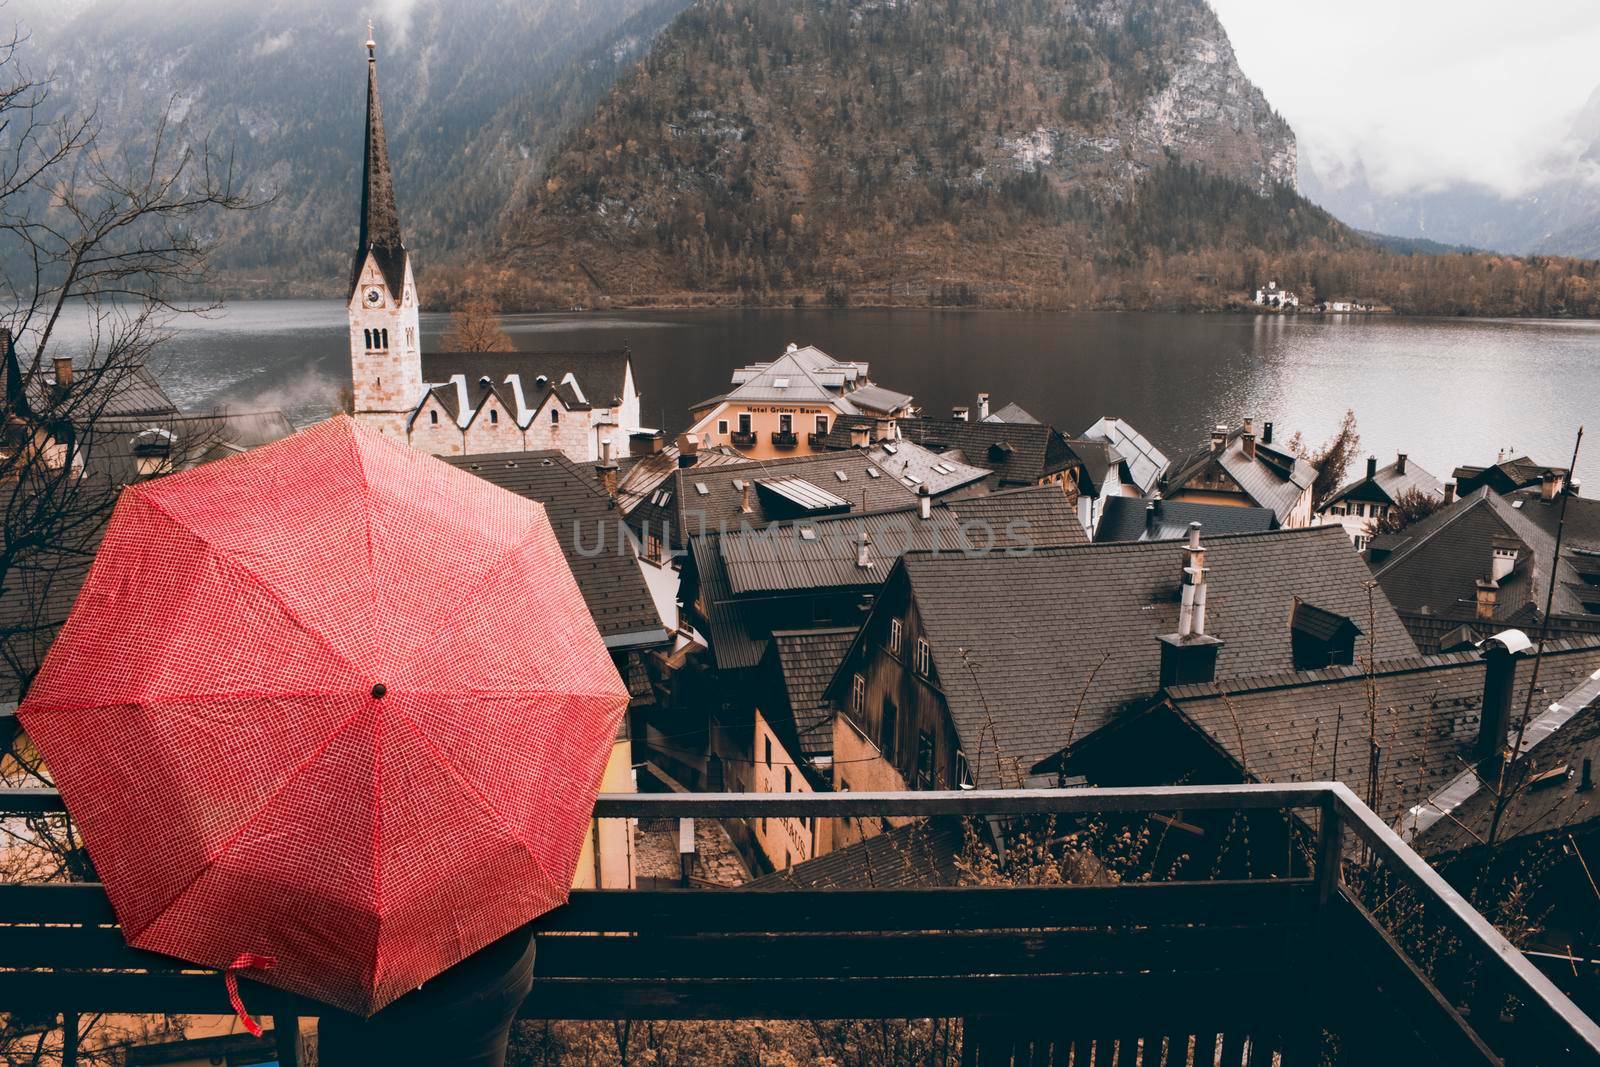 Girl holding a red umbrella looking at Hallstatt tourist town in Austria in a rainy day